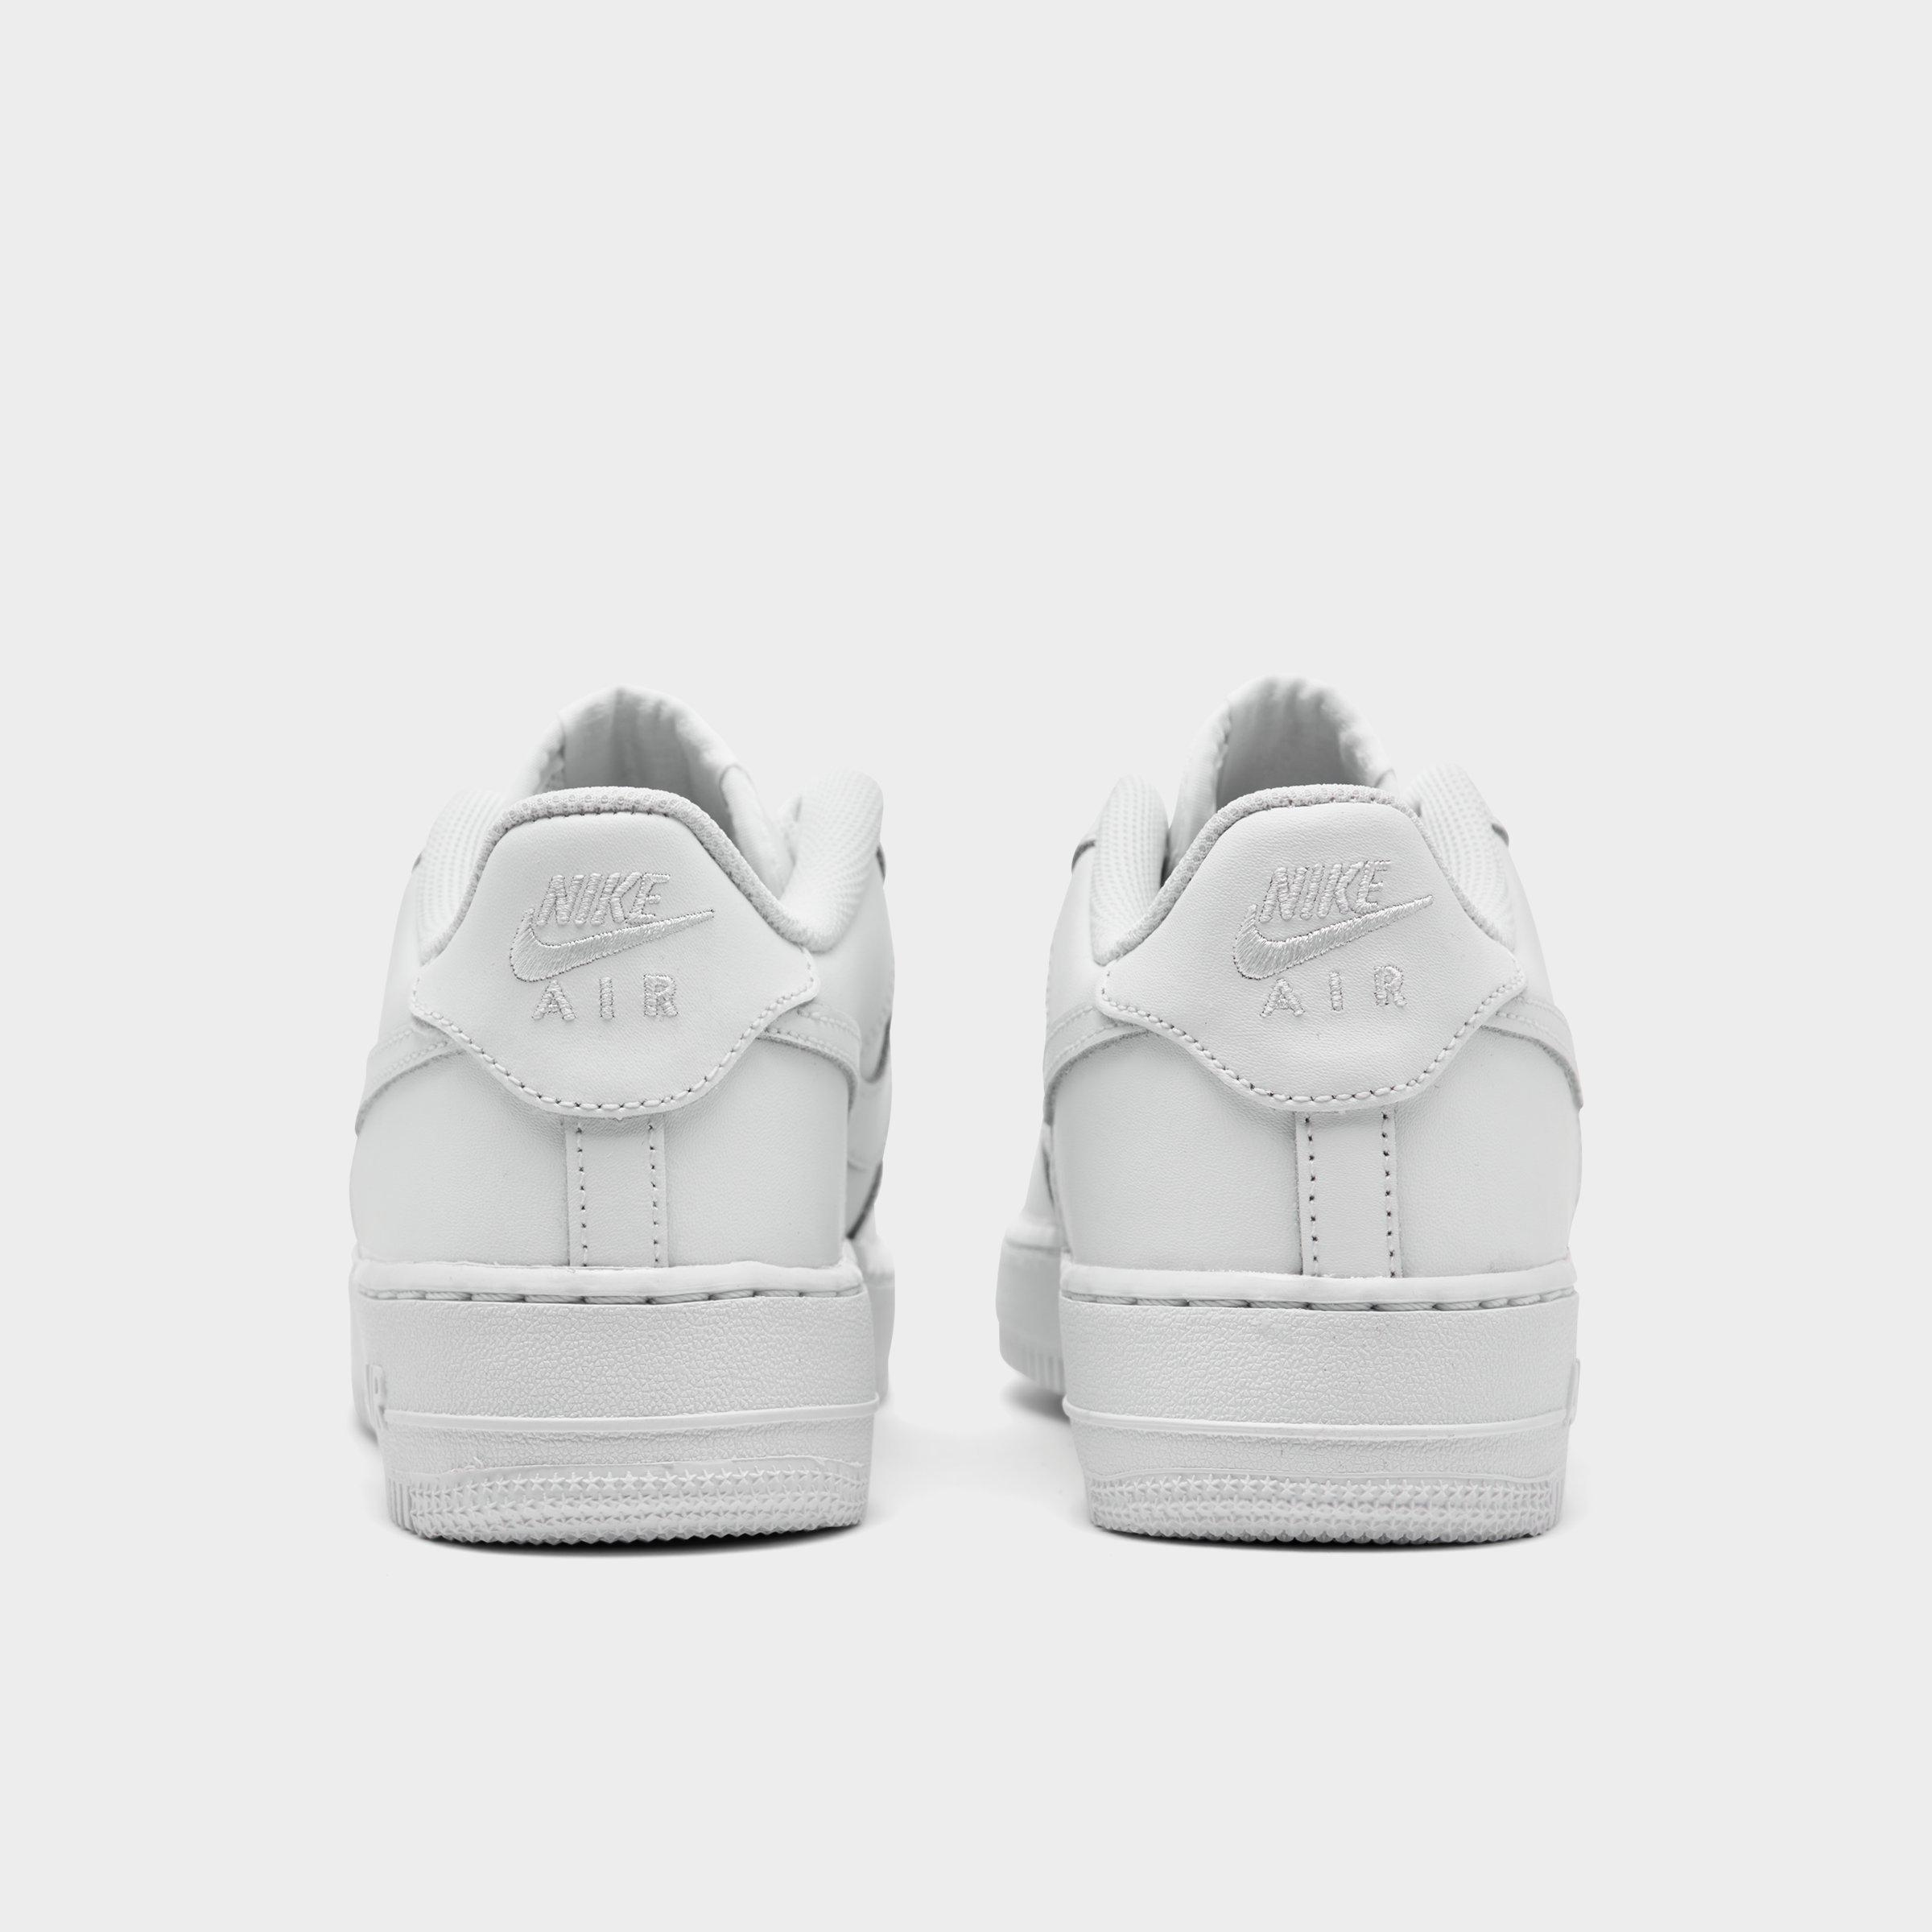 nike air force back view